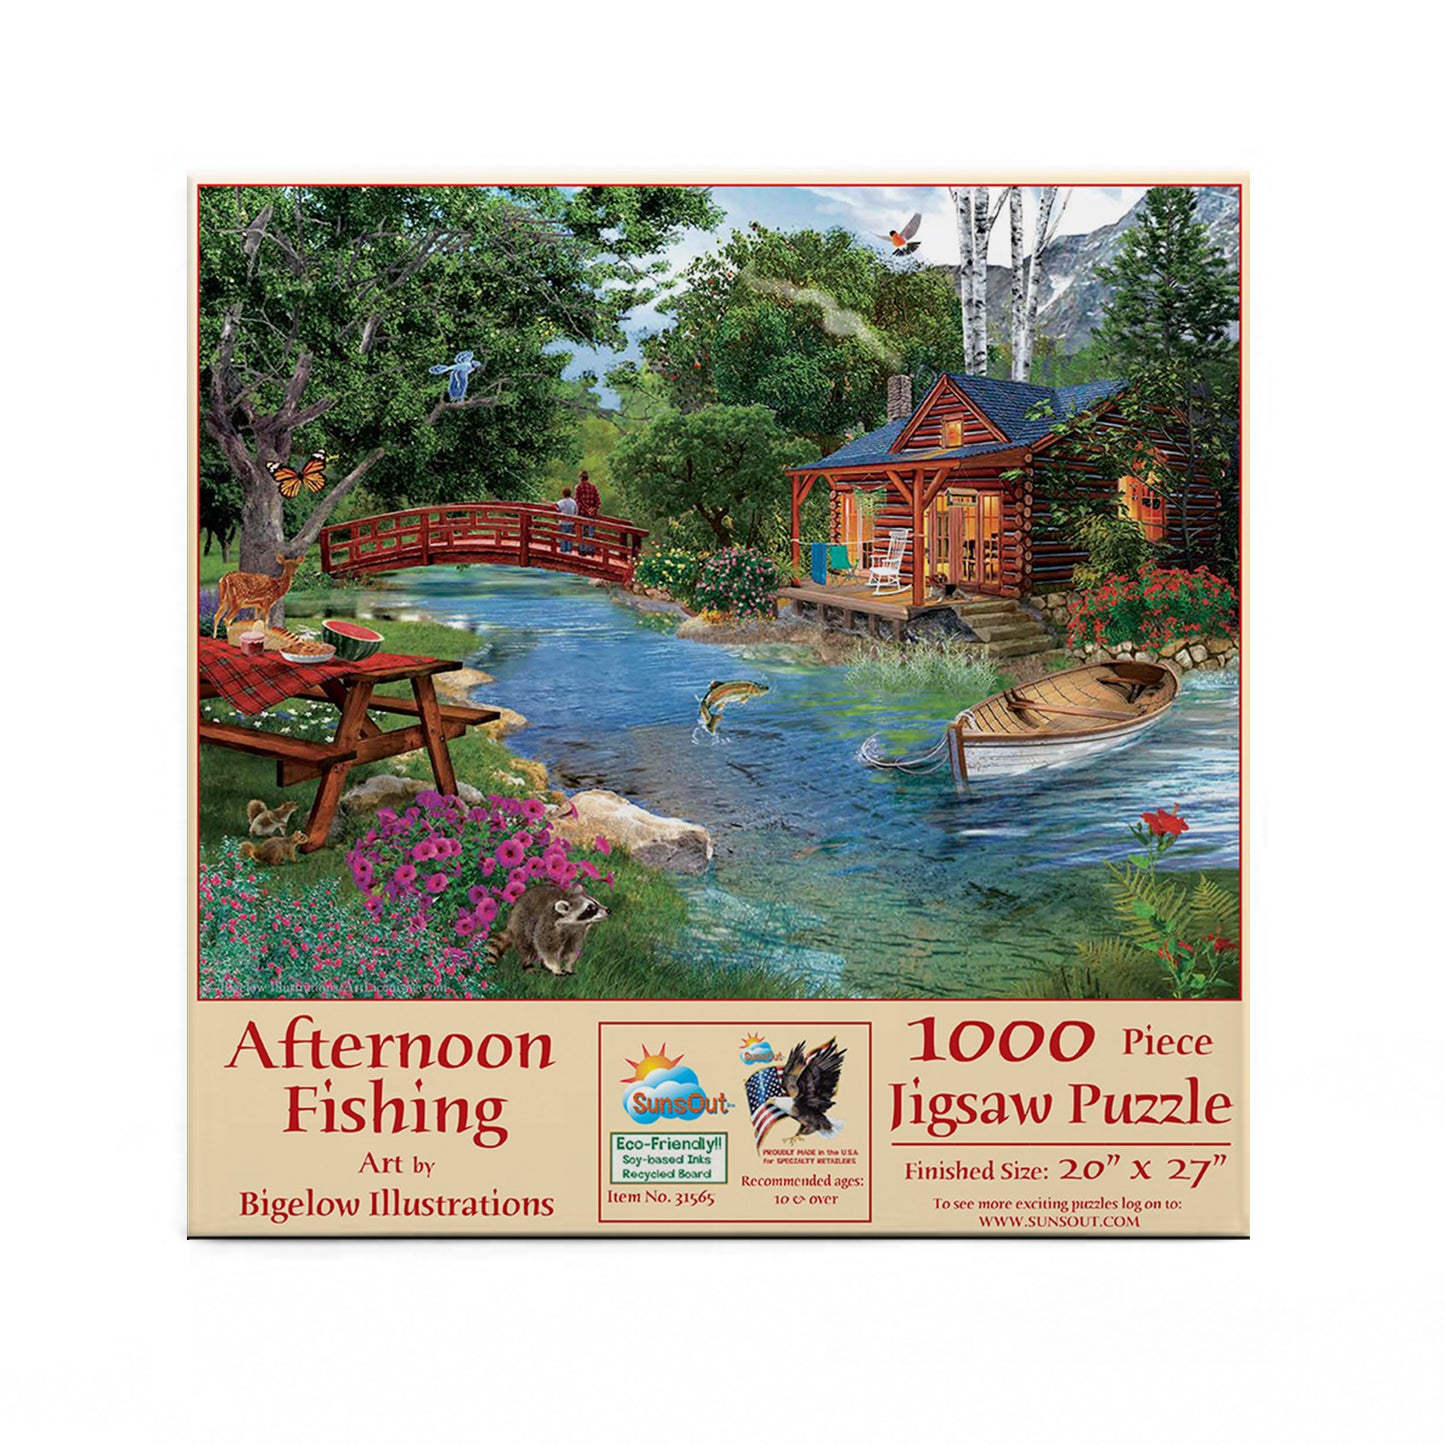 Afternoon fishing - 1000 Piece Jigsaw Puzzle